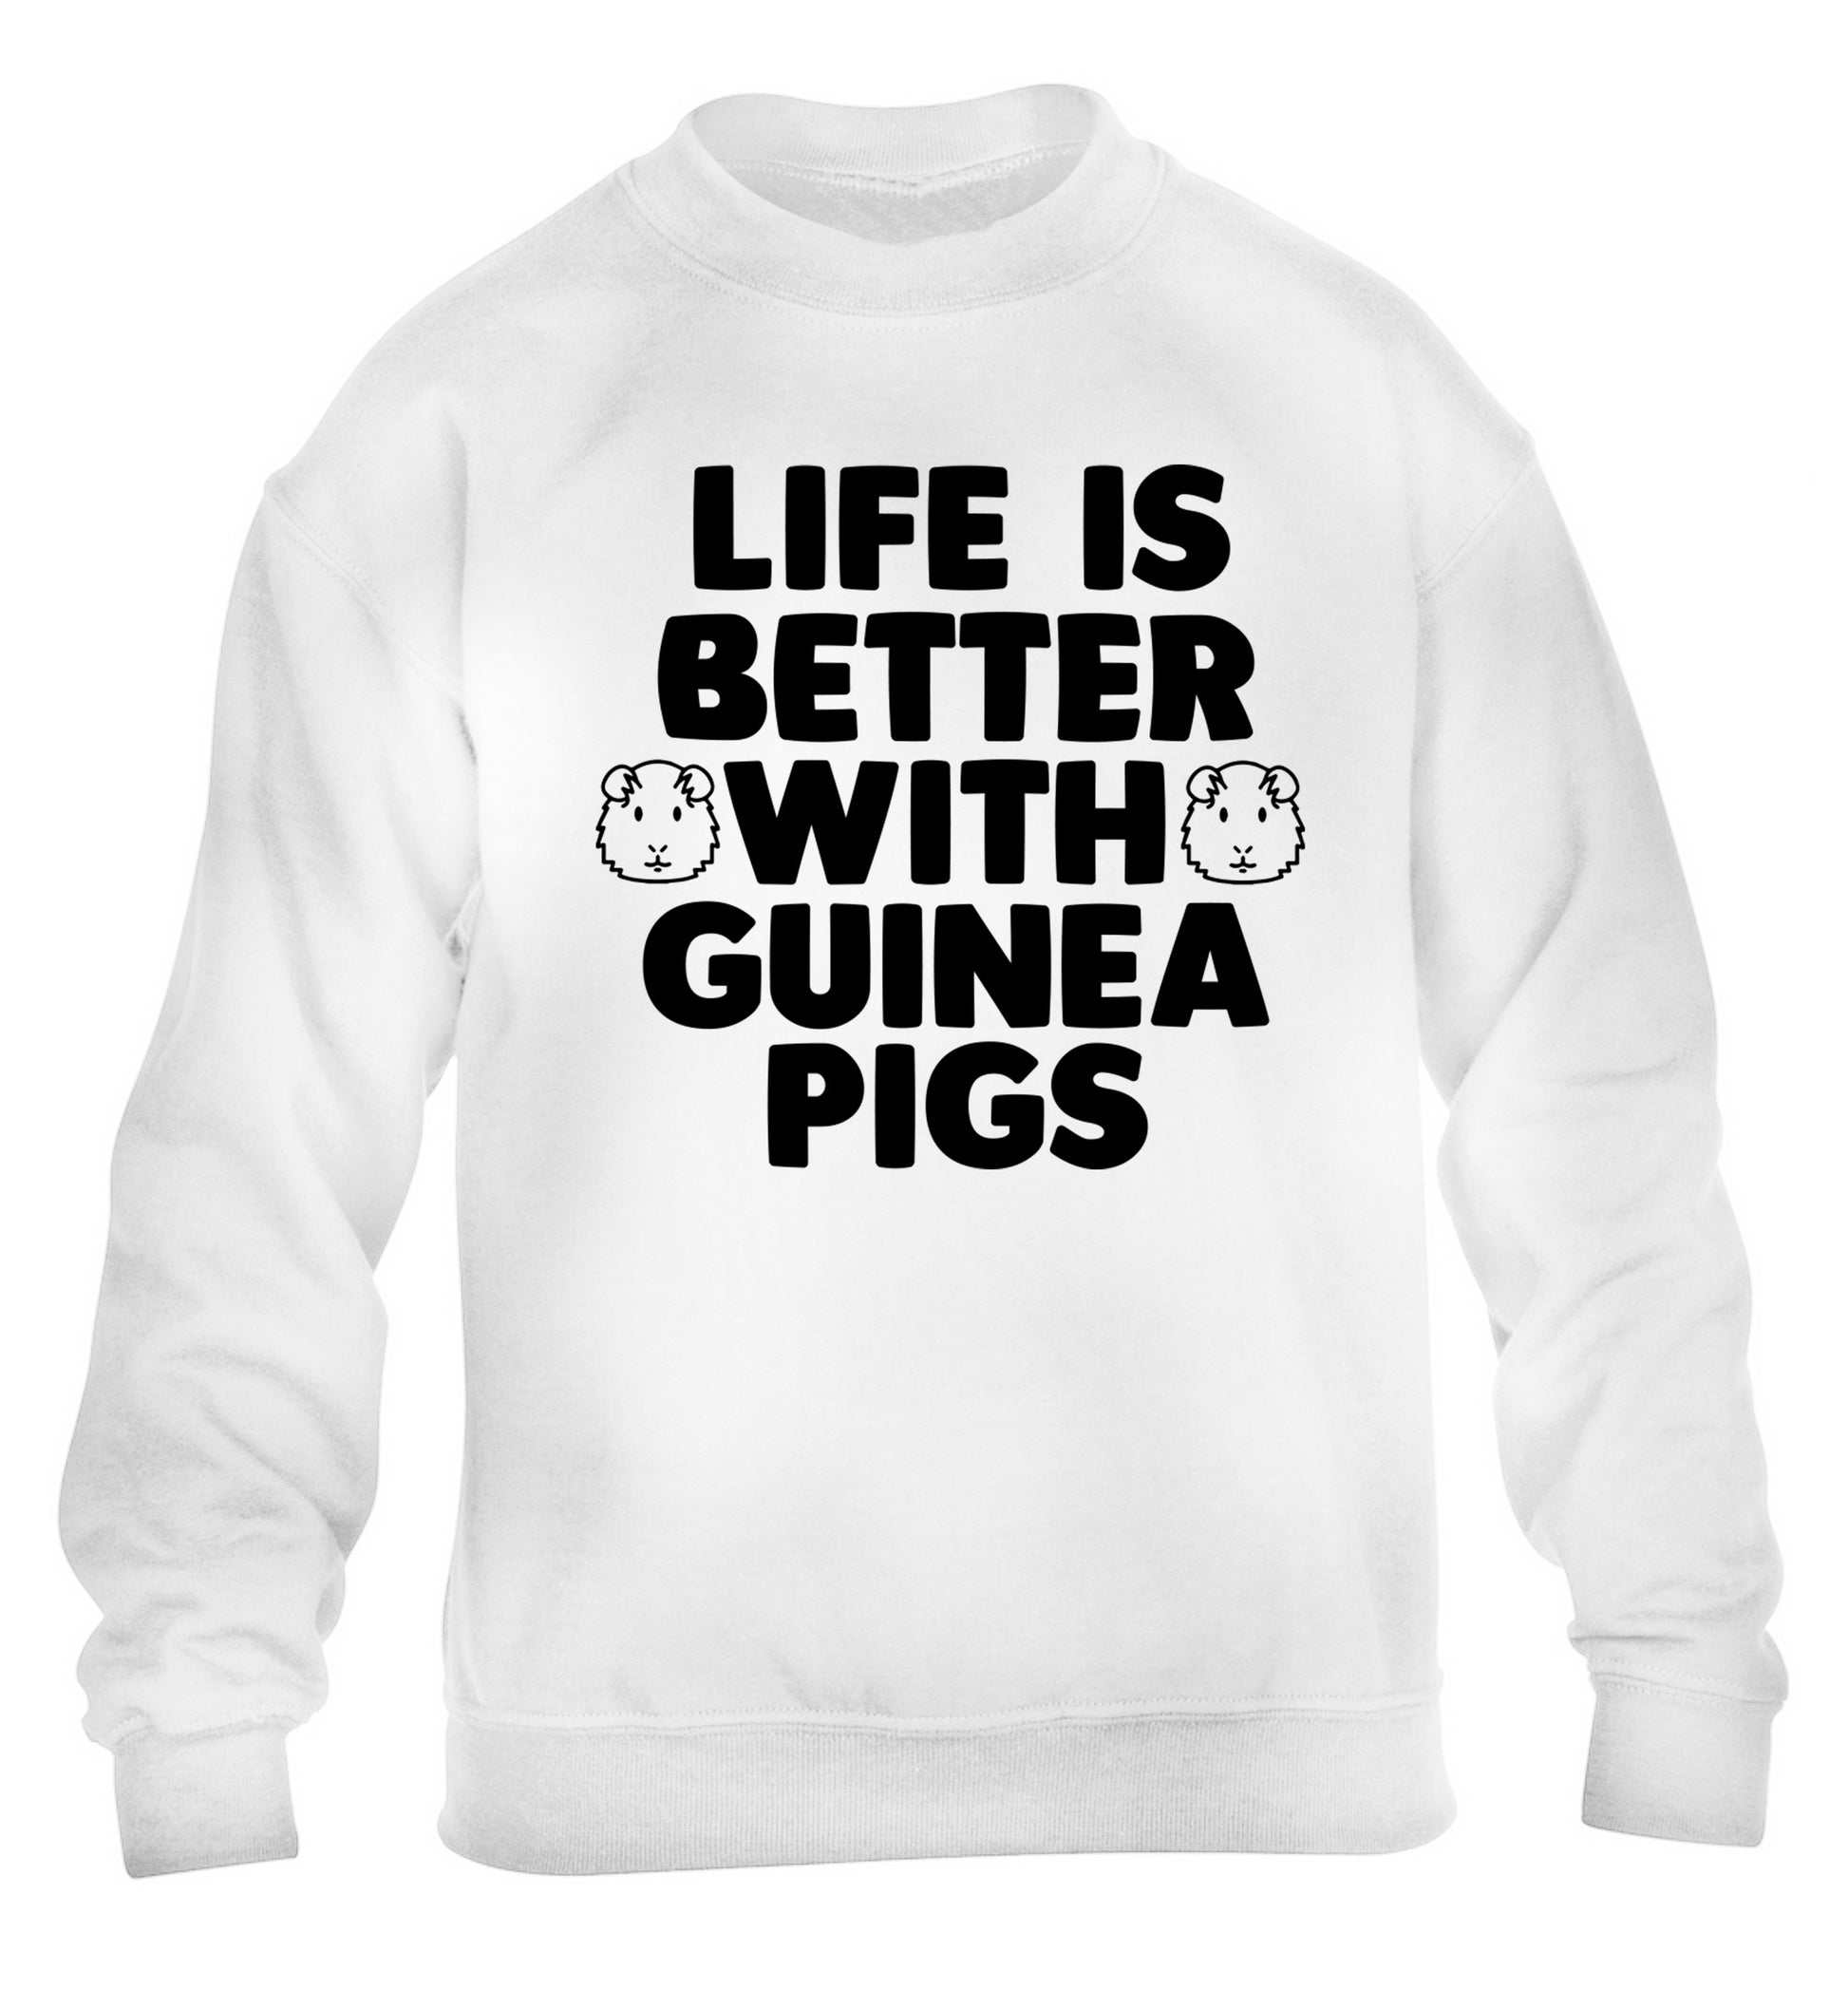 Life is better with guinea pigs children's white  sweater 12-14 Years